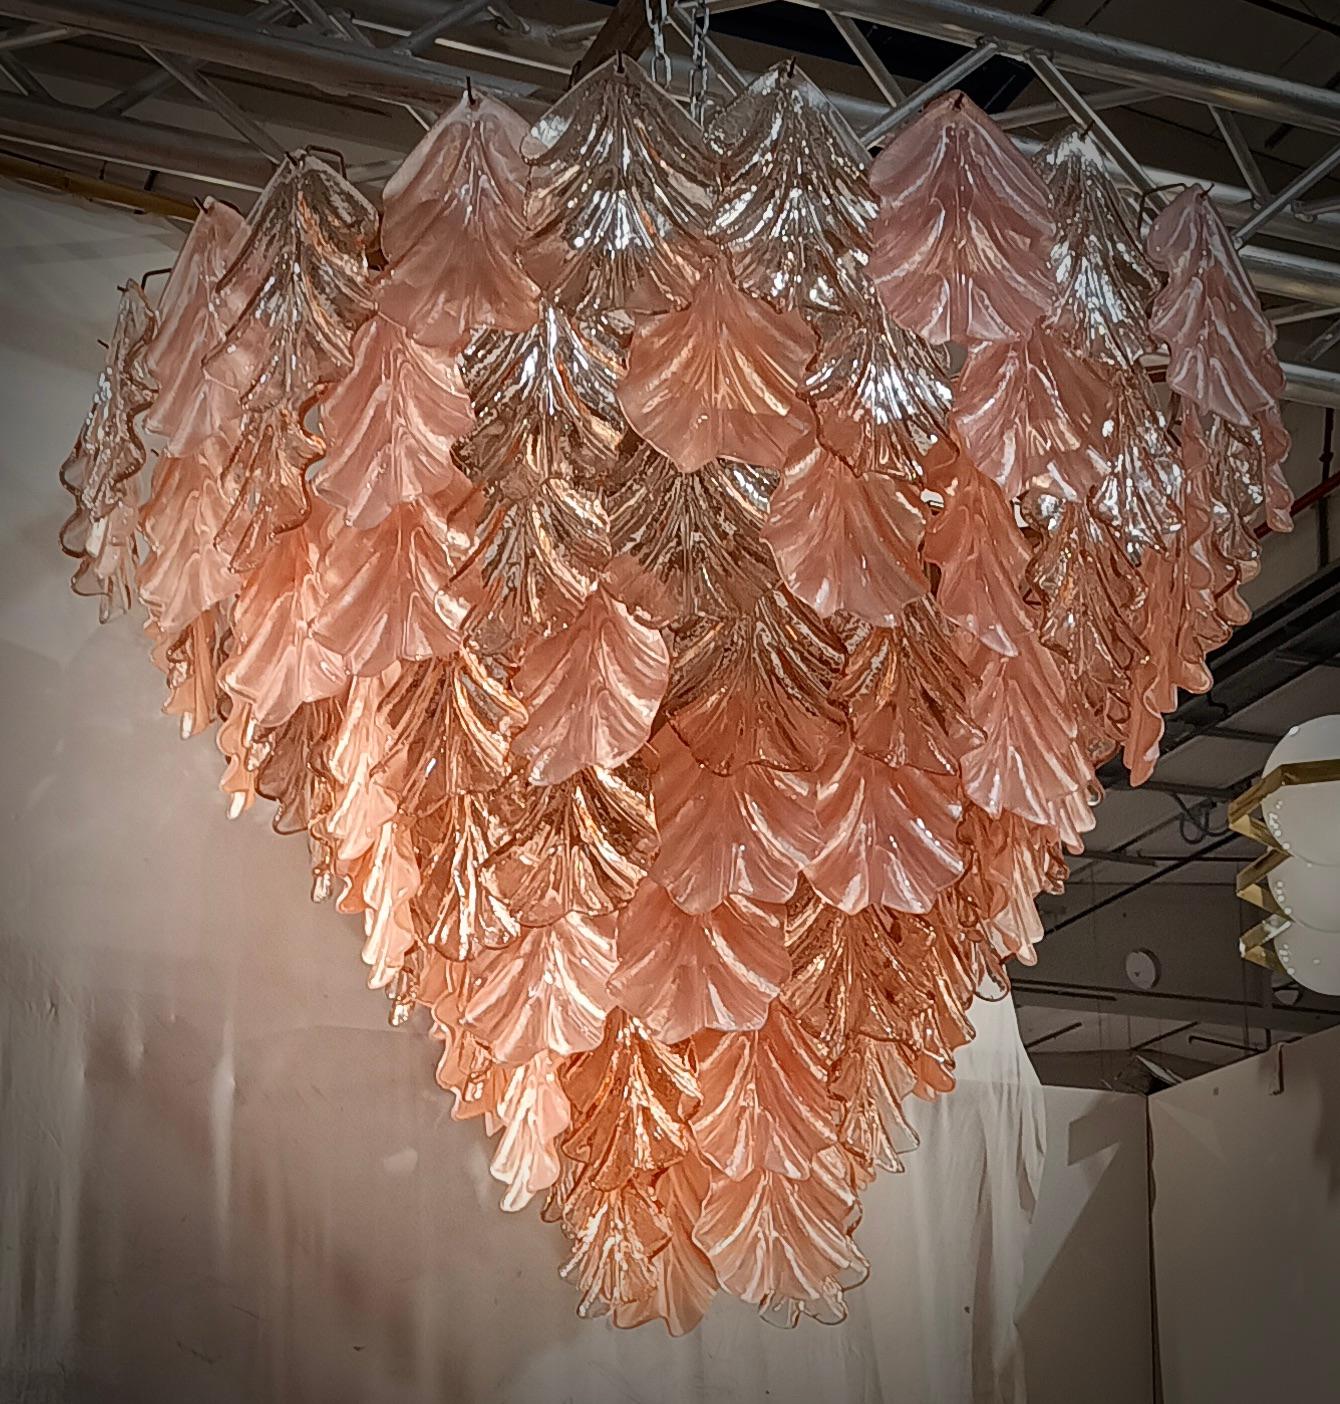 Fantastic Venetian pink color for a Cascade of Murano leaves. A striking color for this chandelier.

All in Murano art glass with pink leaves placed all around. The color of this very special Murano chandelier is very bright pink. Its construction